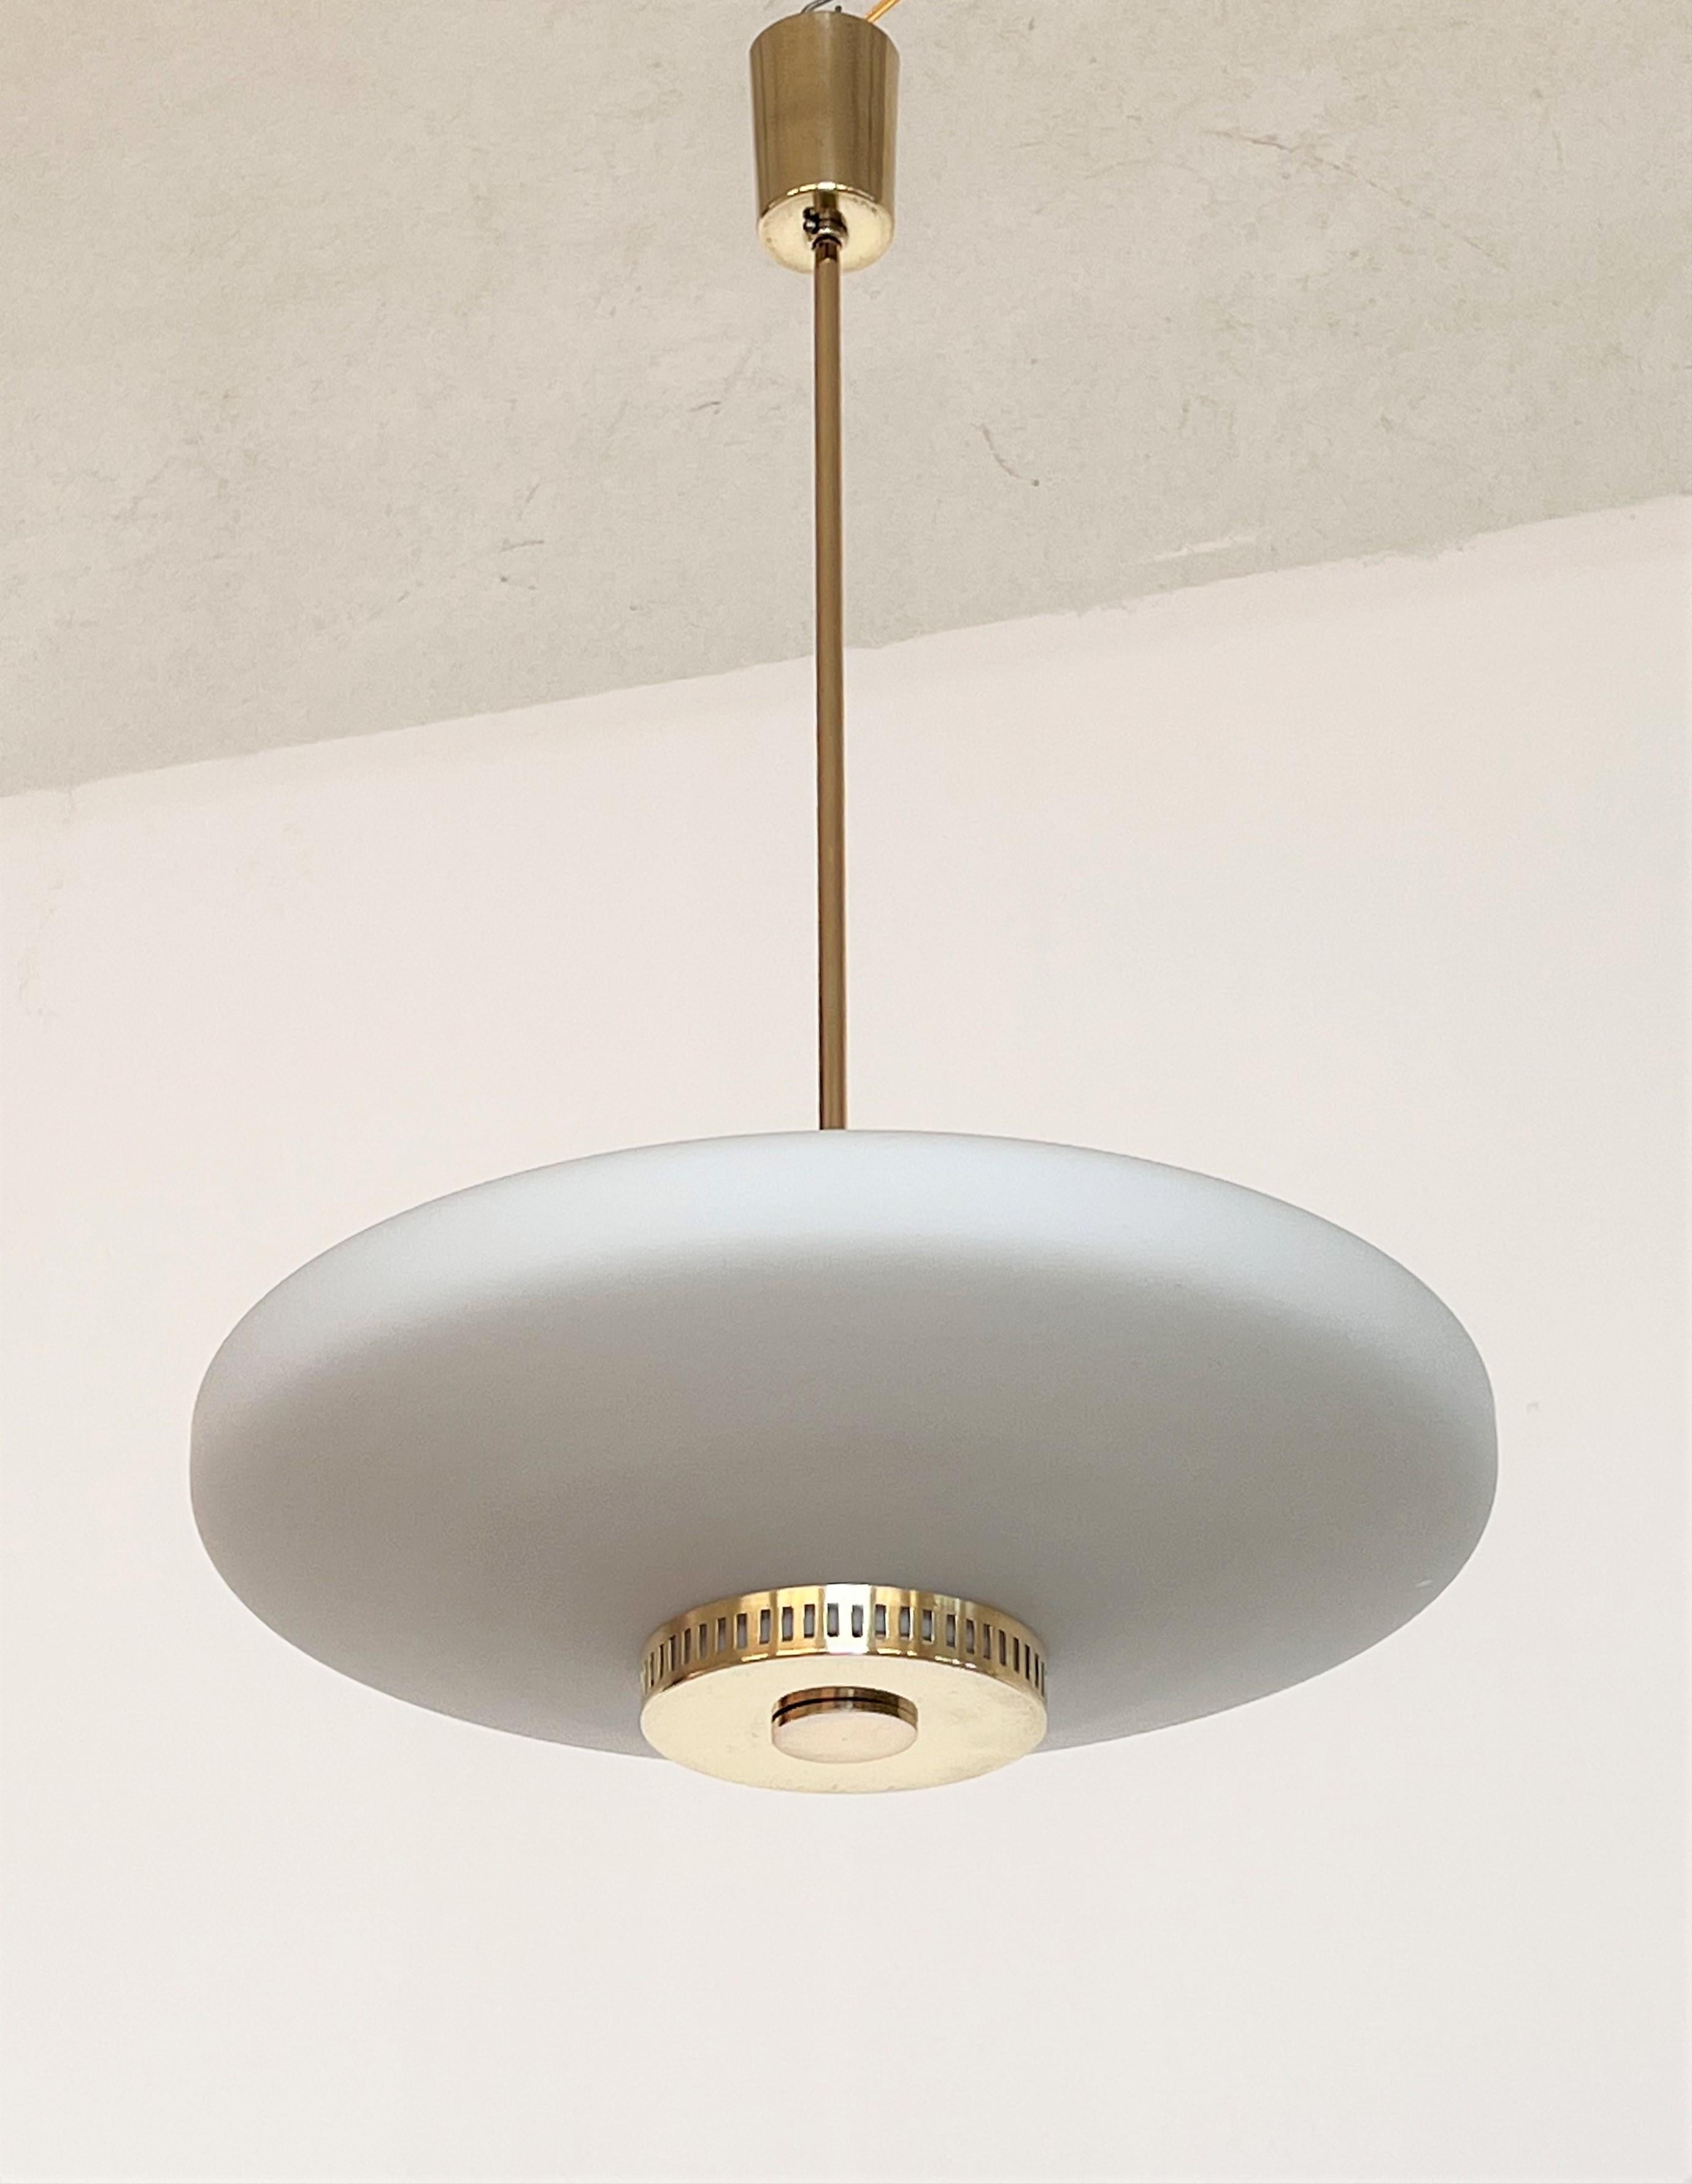 Gorgeous pendant light with stunning opaline glass Made in Italy by Stilnovo.
The pendant is fixed with a brass bar to ceiling and with its original ceiling rose in shiny brass .
Electric wire was renewed. 
The pendant light works with new standard